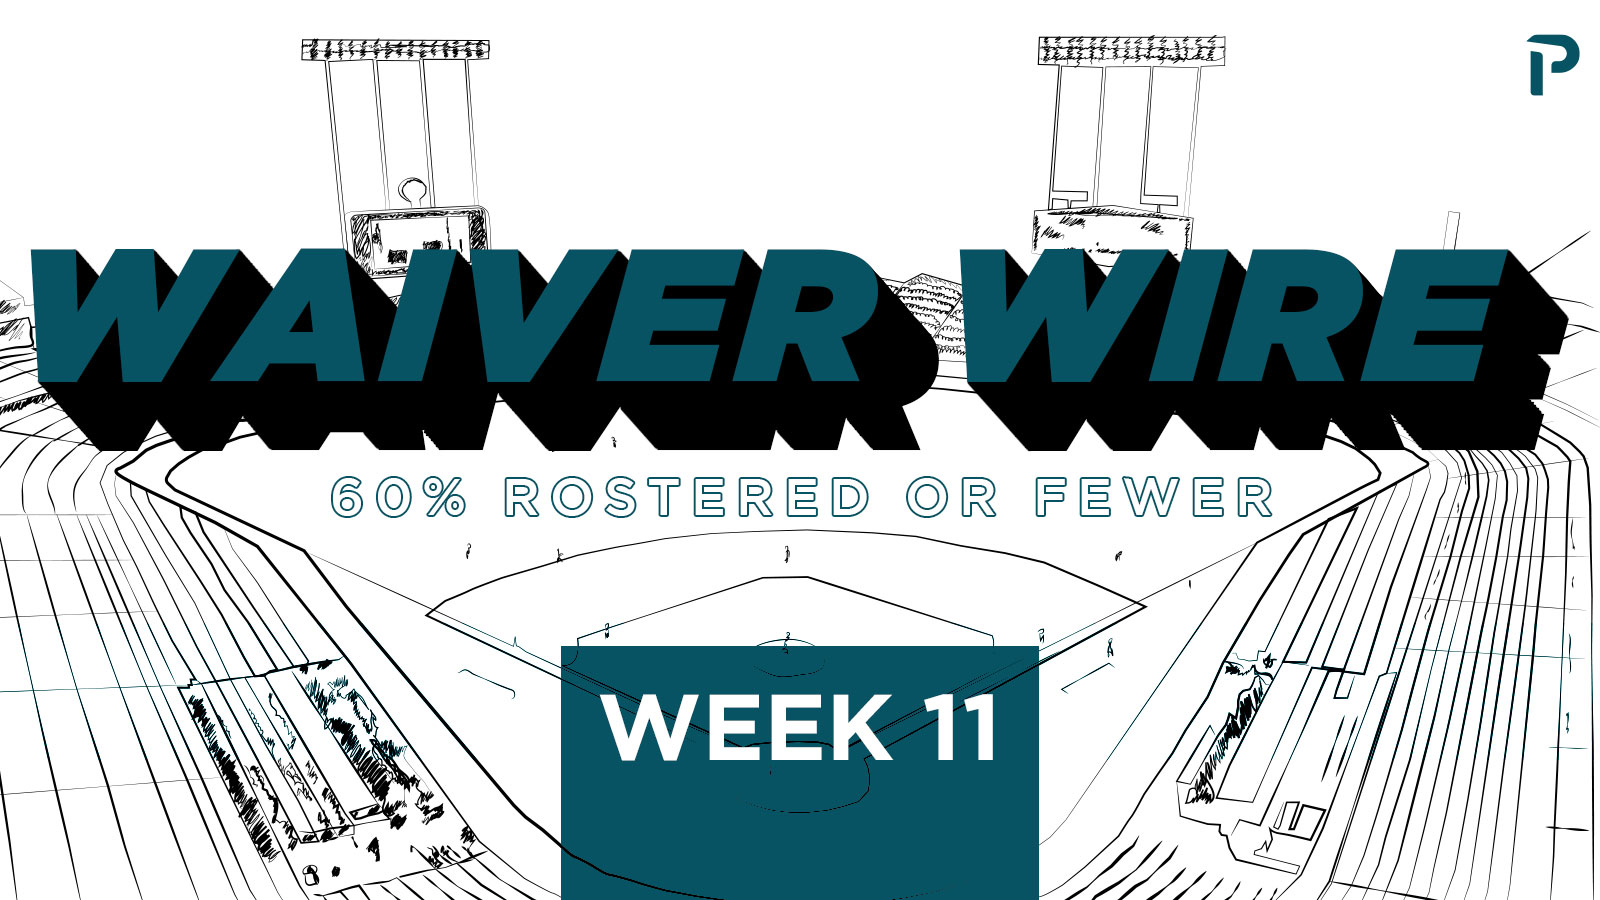 Fantasy Baseball: Top MLB Waiver Wire Pickups for Week 11 of 2021